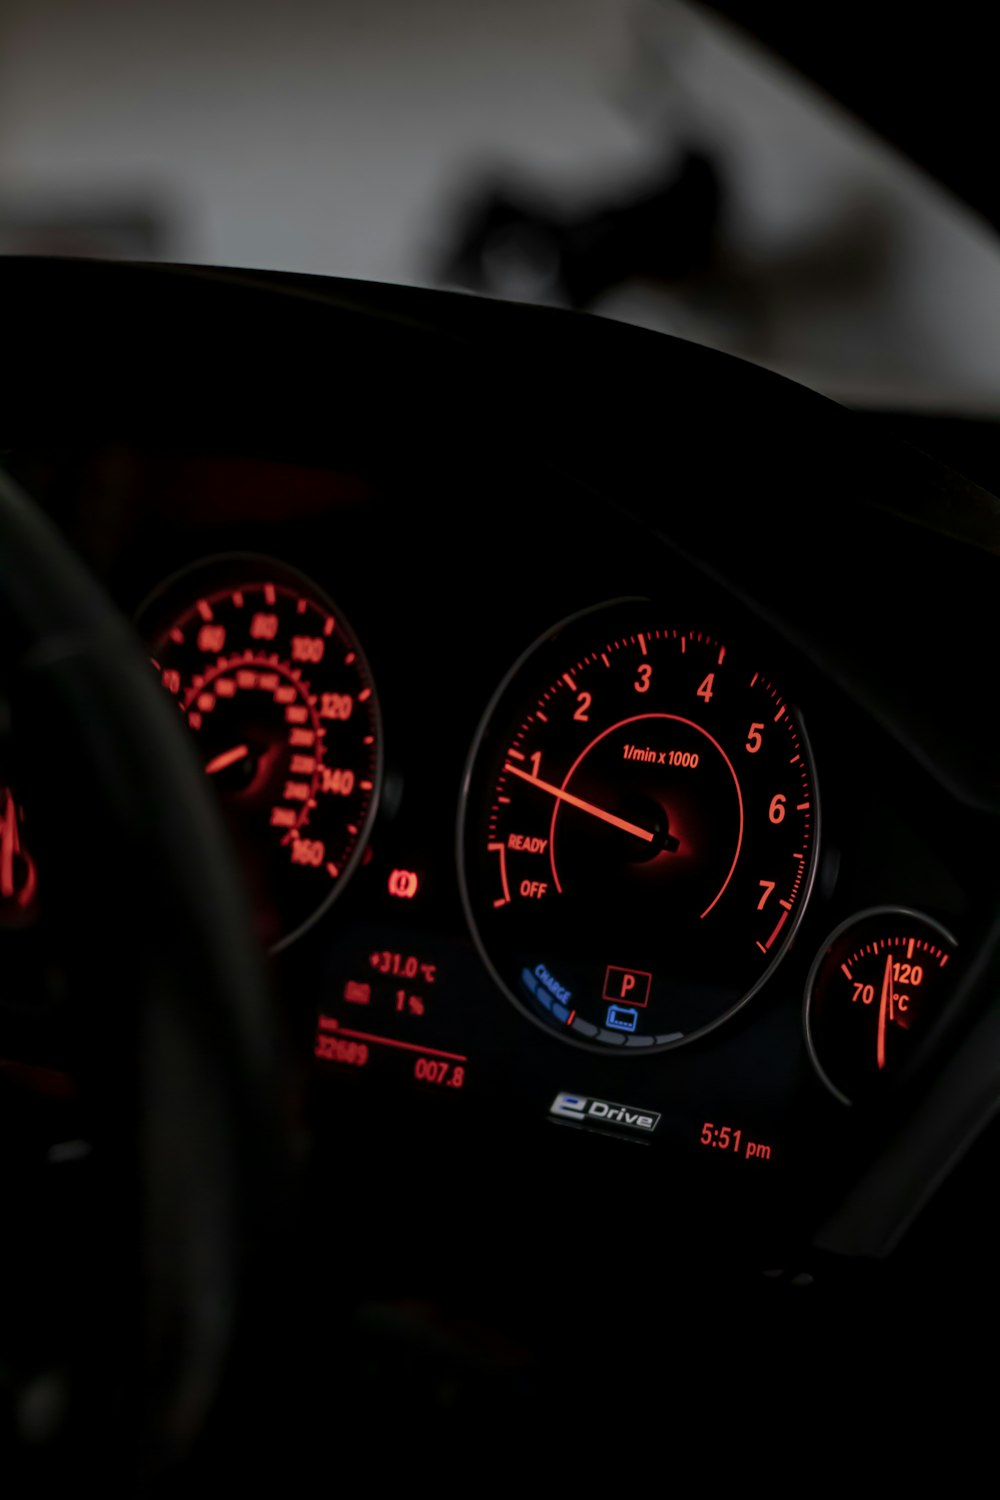 the dashboard of a car with red and white lights